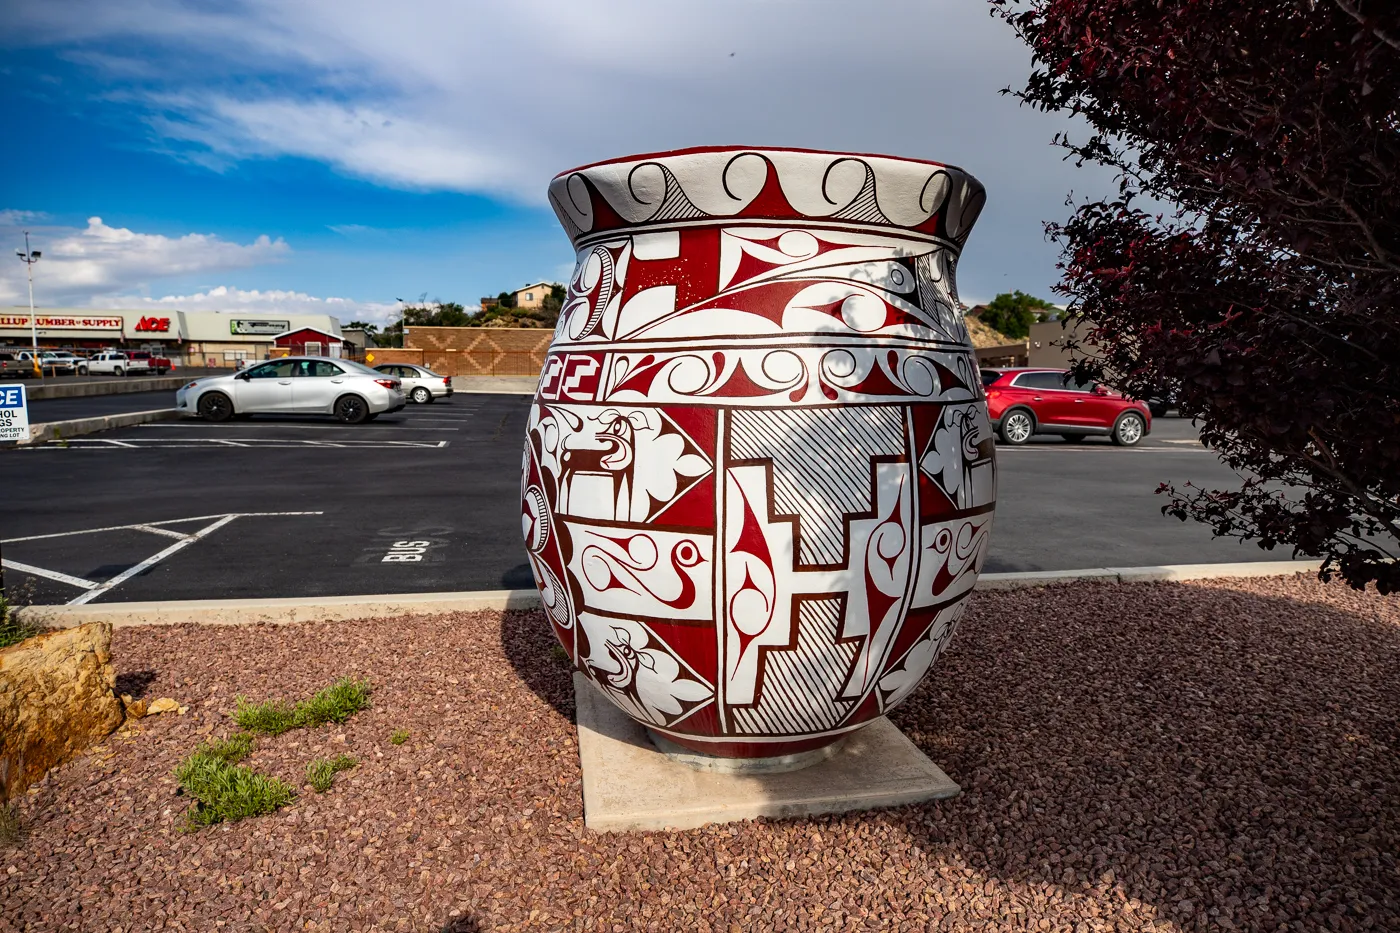 Large Painted Pottery in Gallup, New Mexico Route66 Roadside Attractions